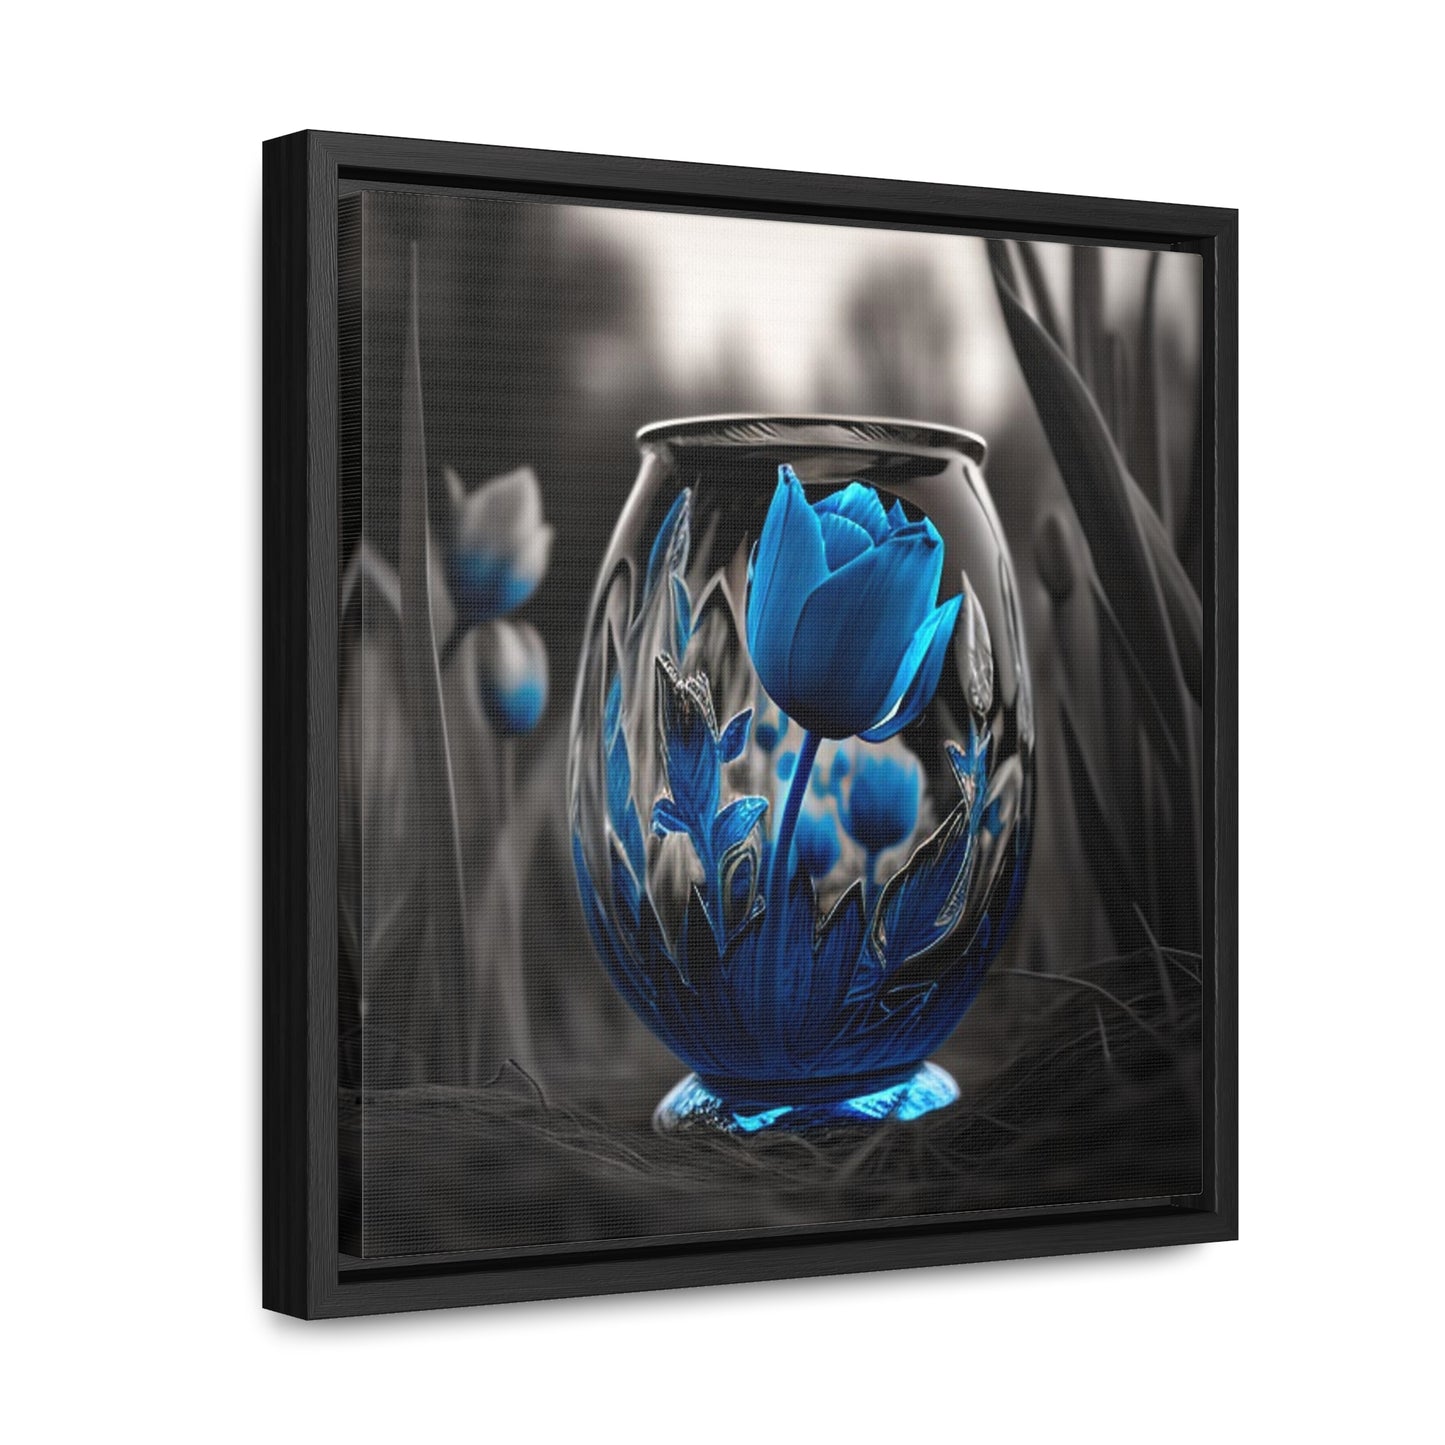 Gallery Canvas Wraps, Square Frame Tulip Blue 2